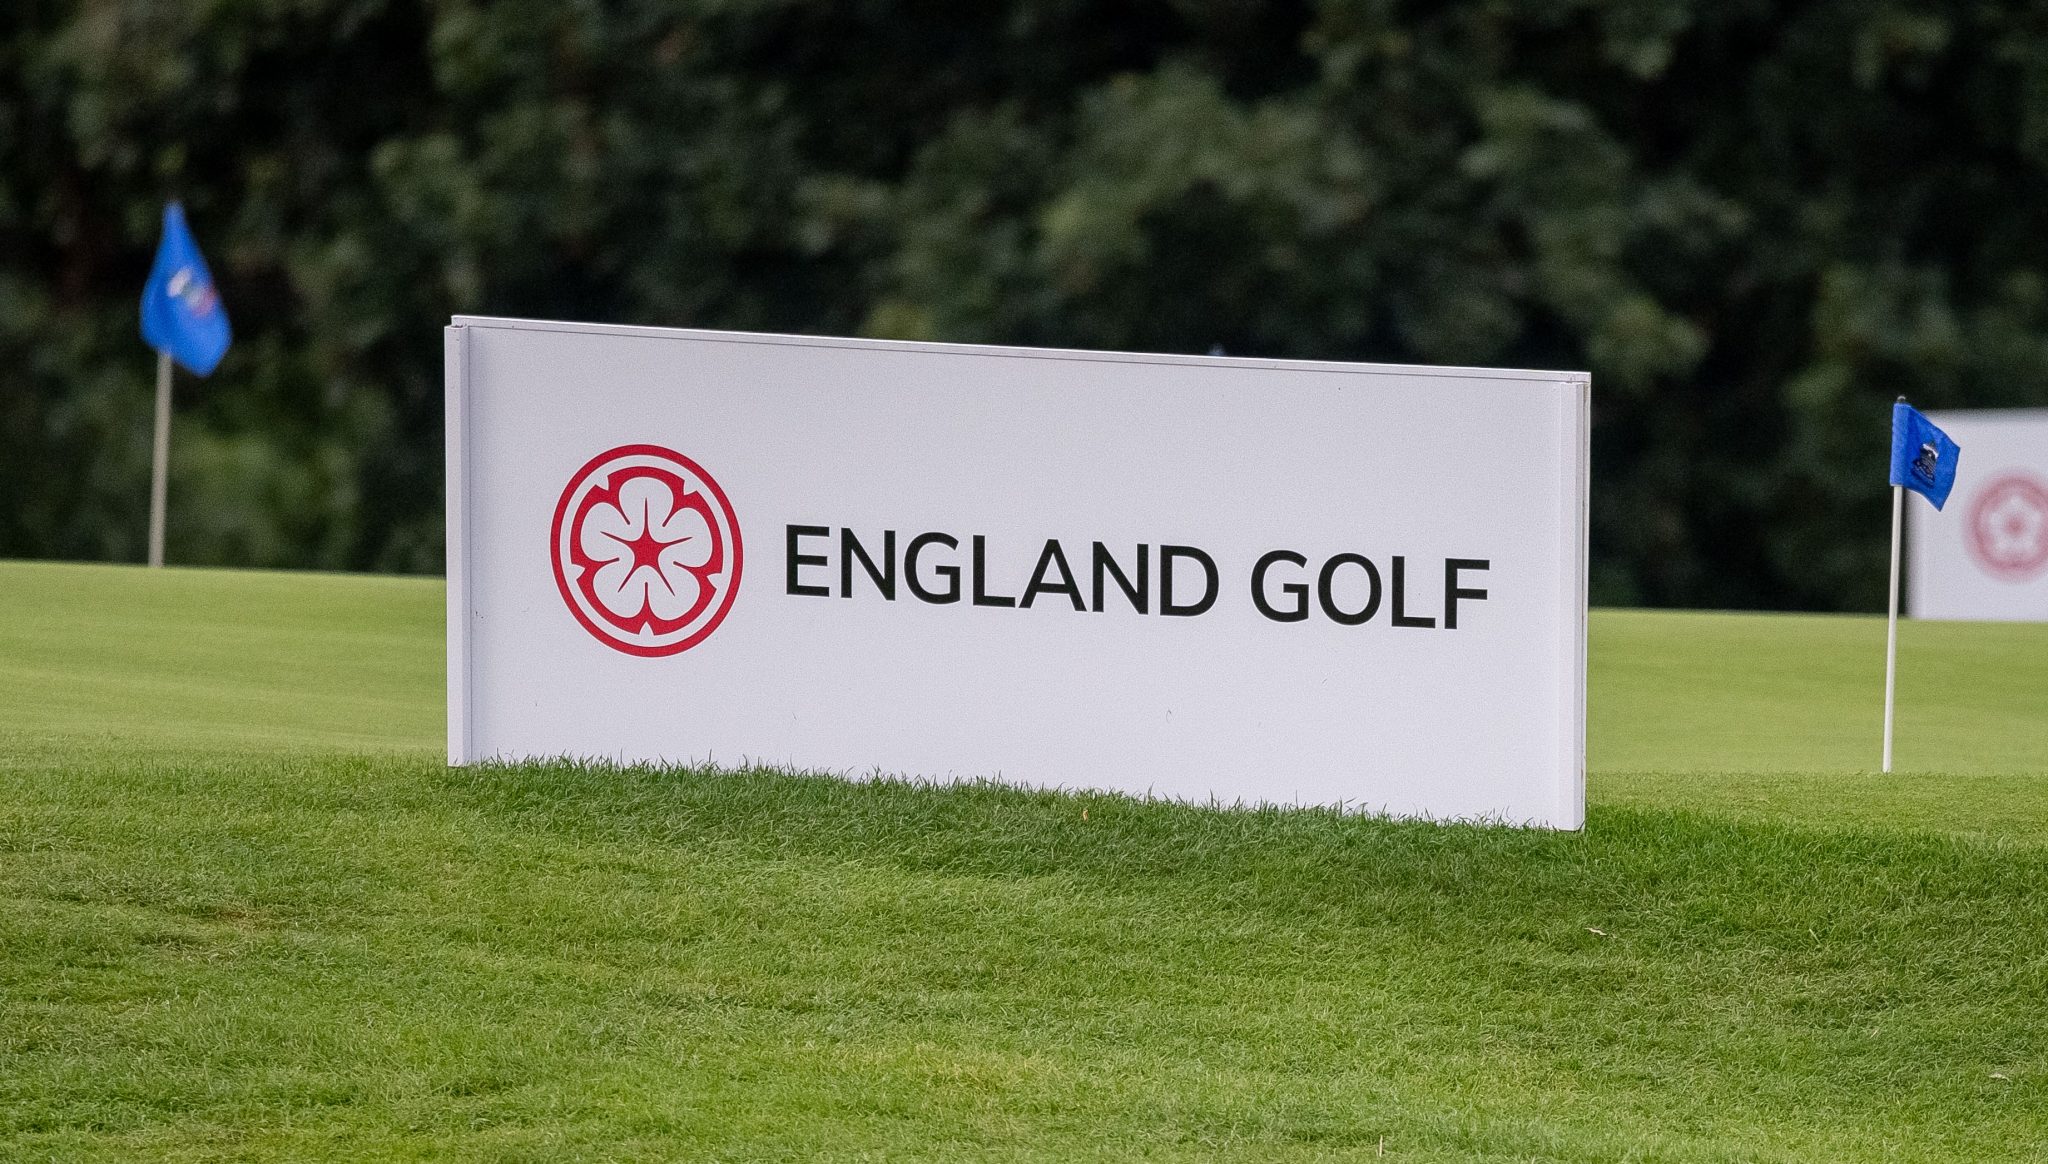 England-Golf-sign-generic-scaled-1